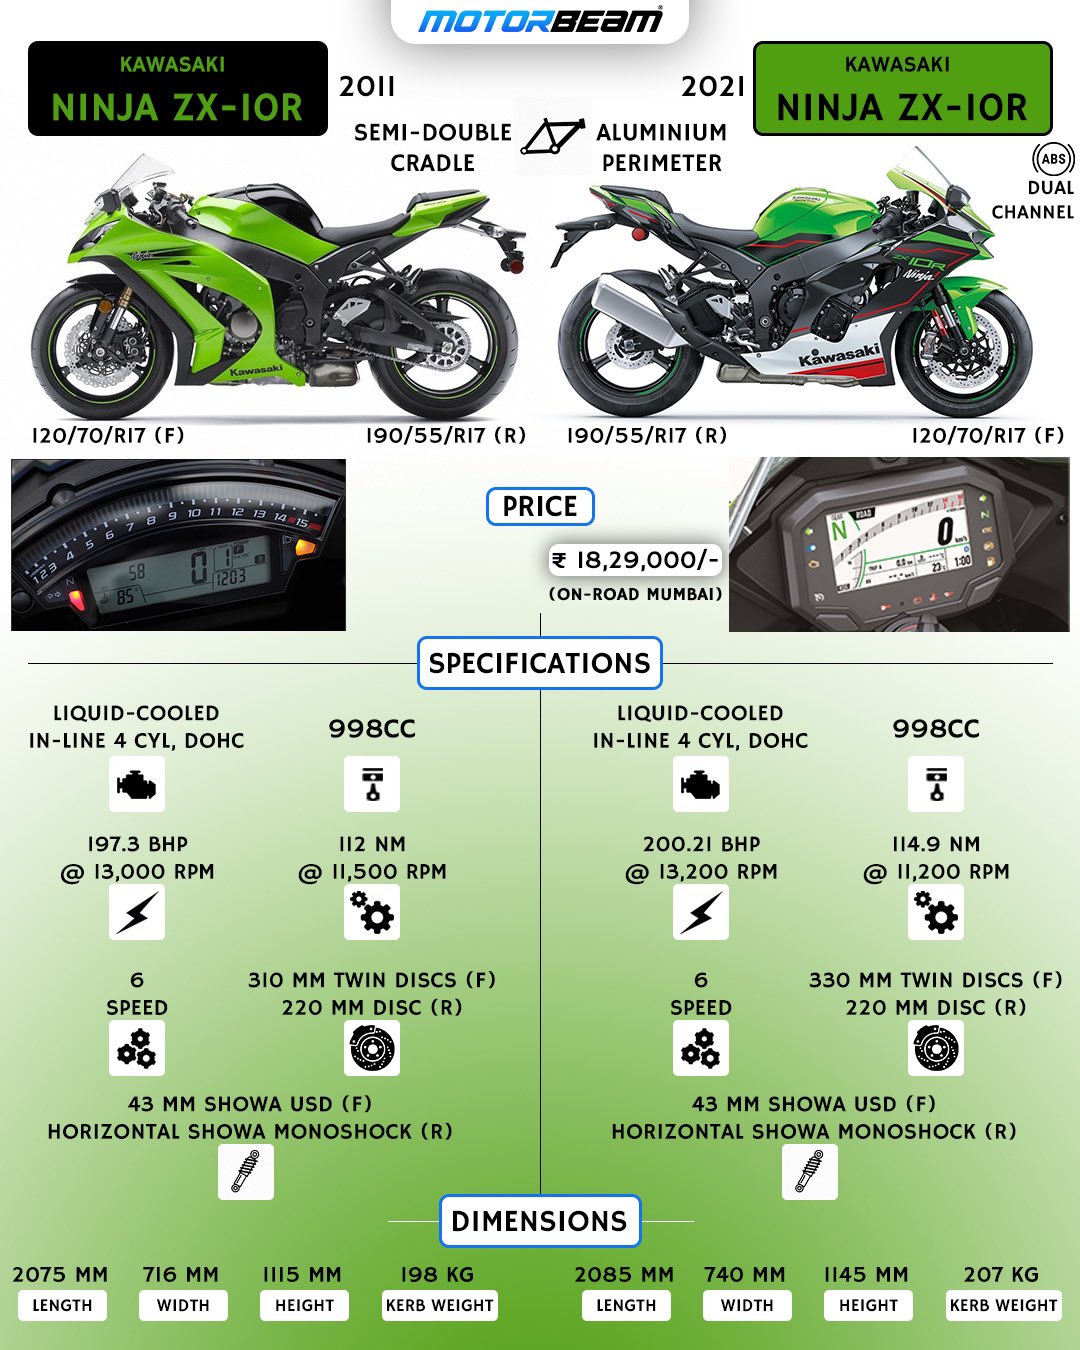 MotorBeam on Twitter: "Kawasaki Ninja ZX-10R 2011 vs 2021. out specs and let us know which styling do you like more? https://t.co/OlMgVKXDmo" / Twitter